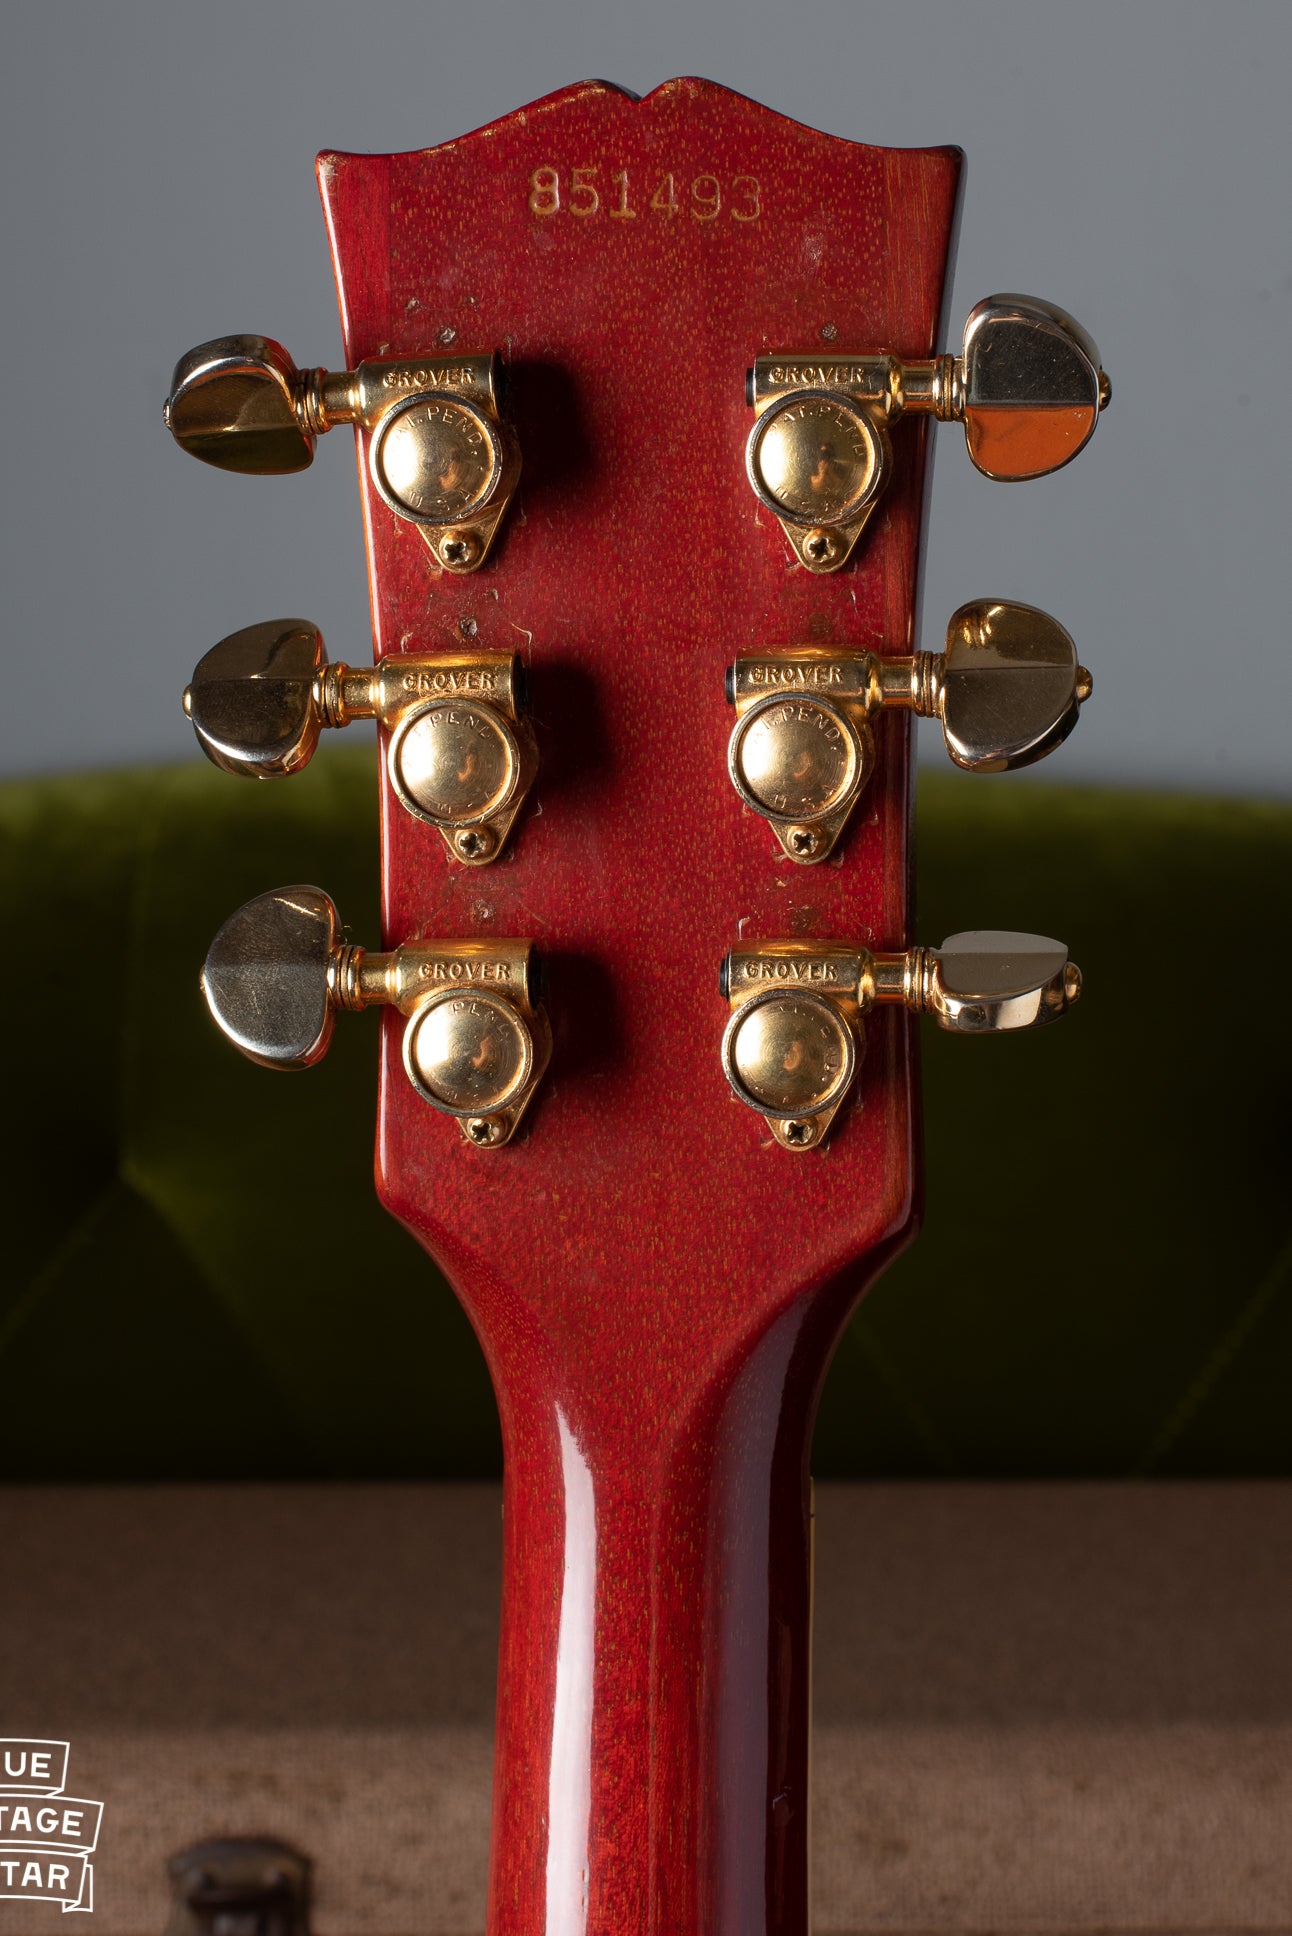 1966 Gibson ES-345 neck and headstock